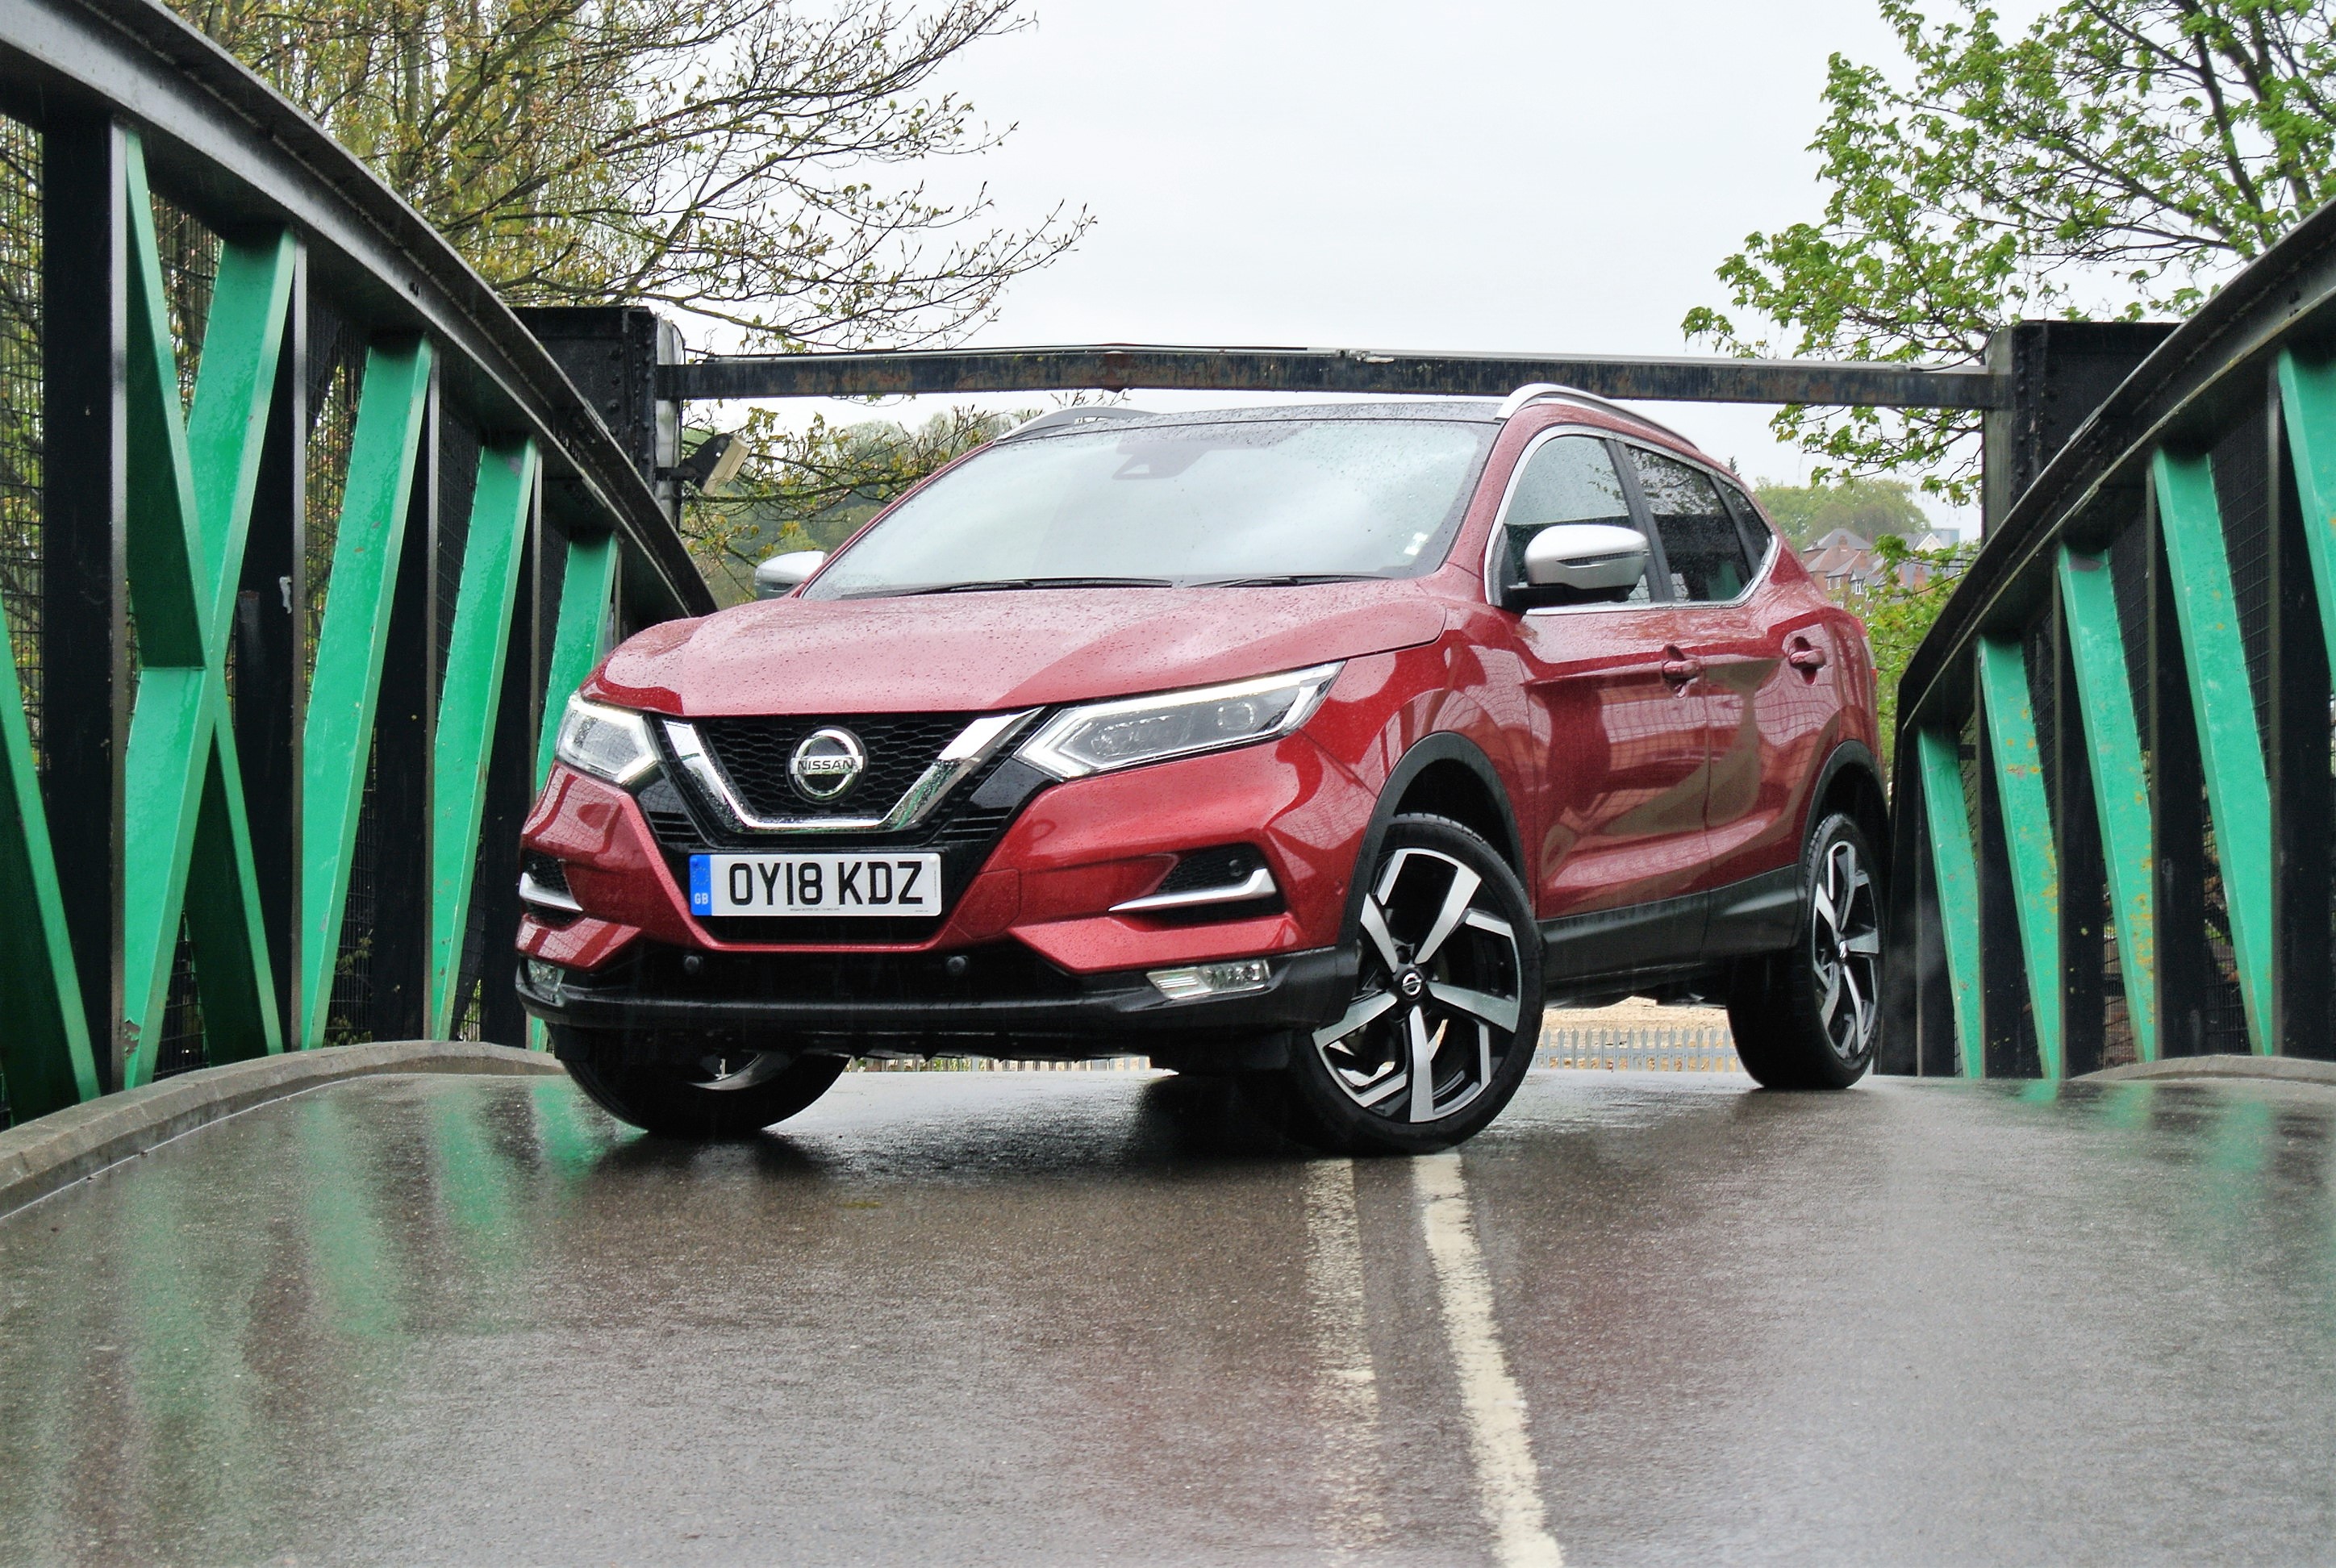 Nissan’s evergreen crossover Qashqai sets benchmark for class